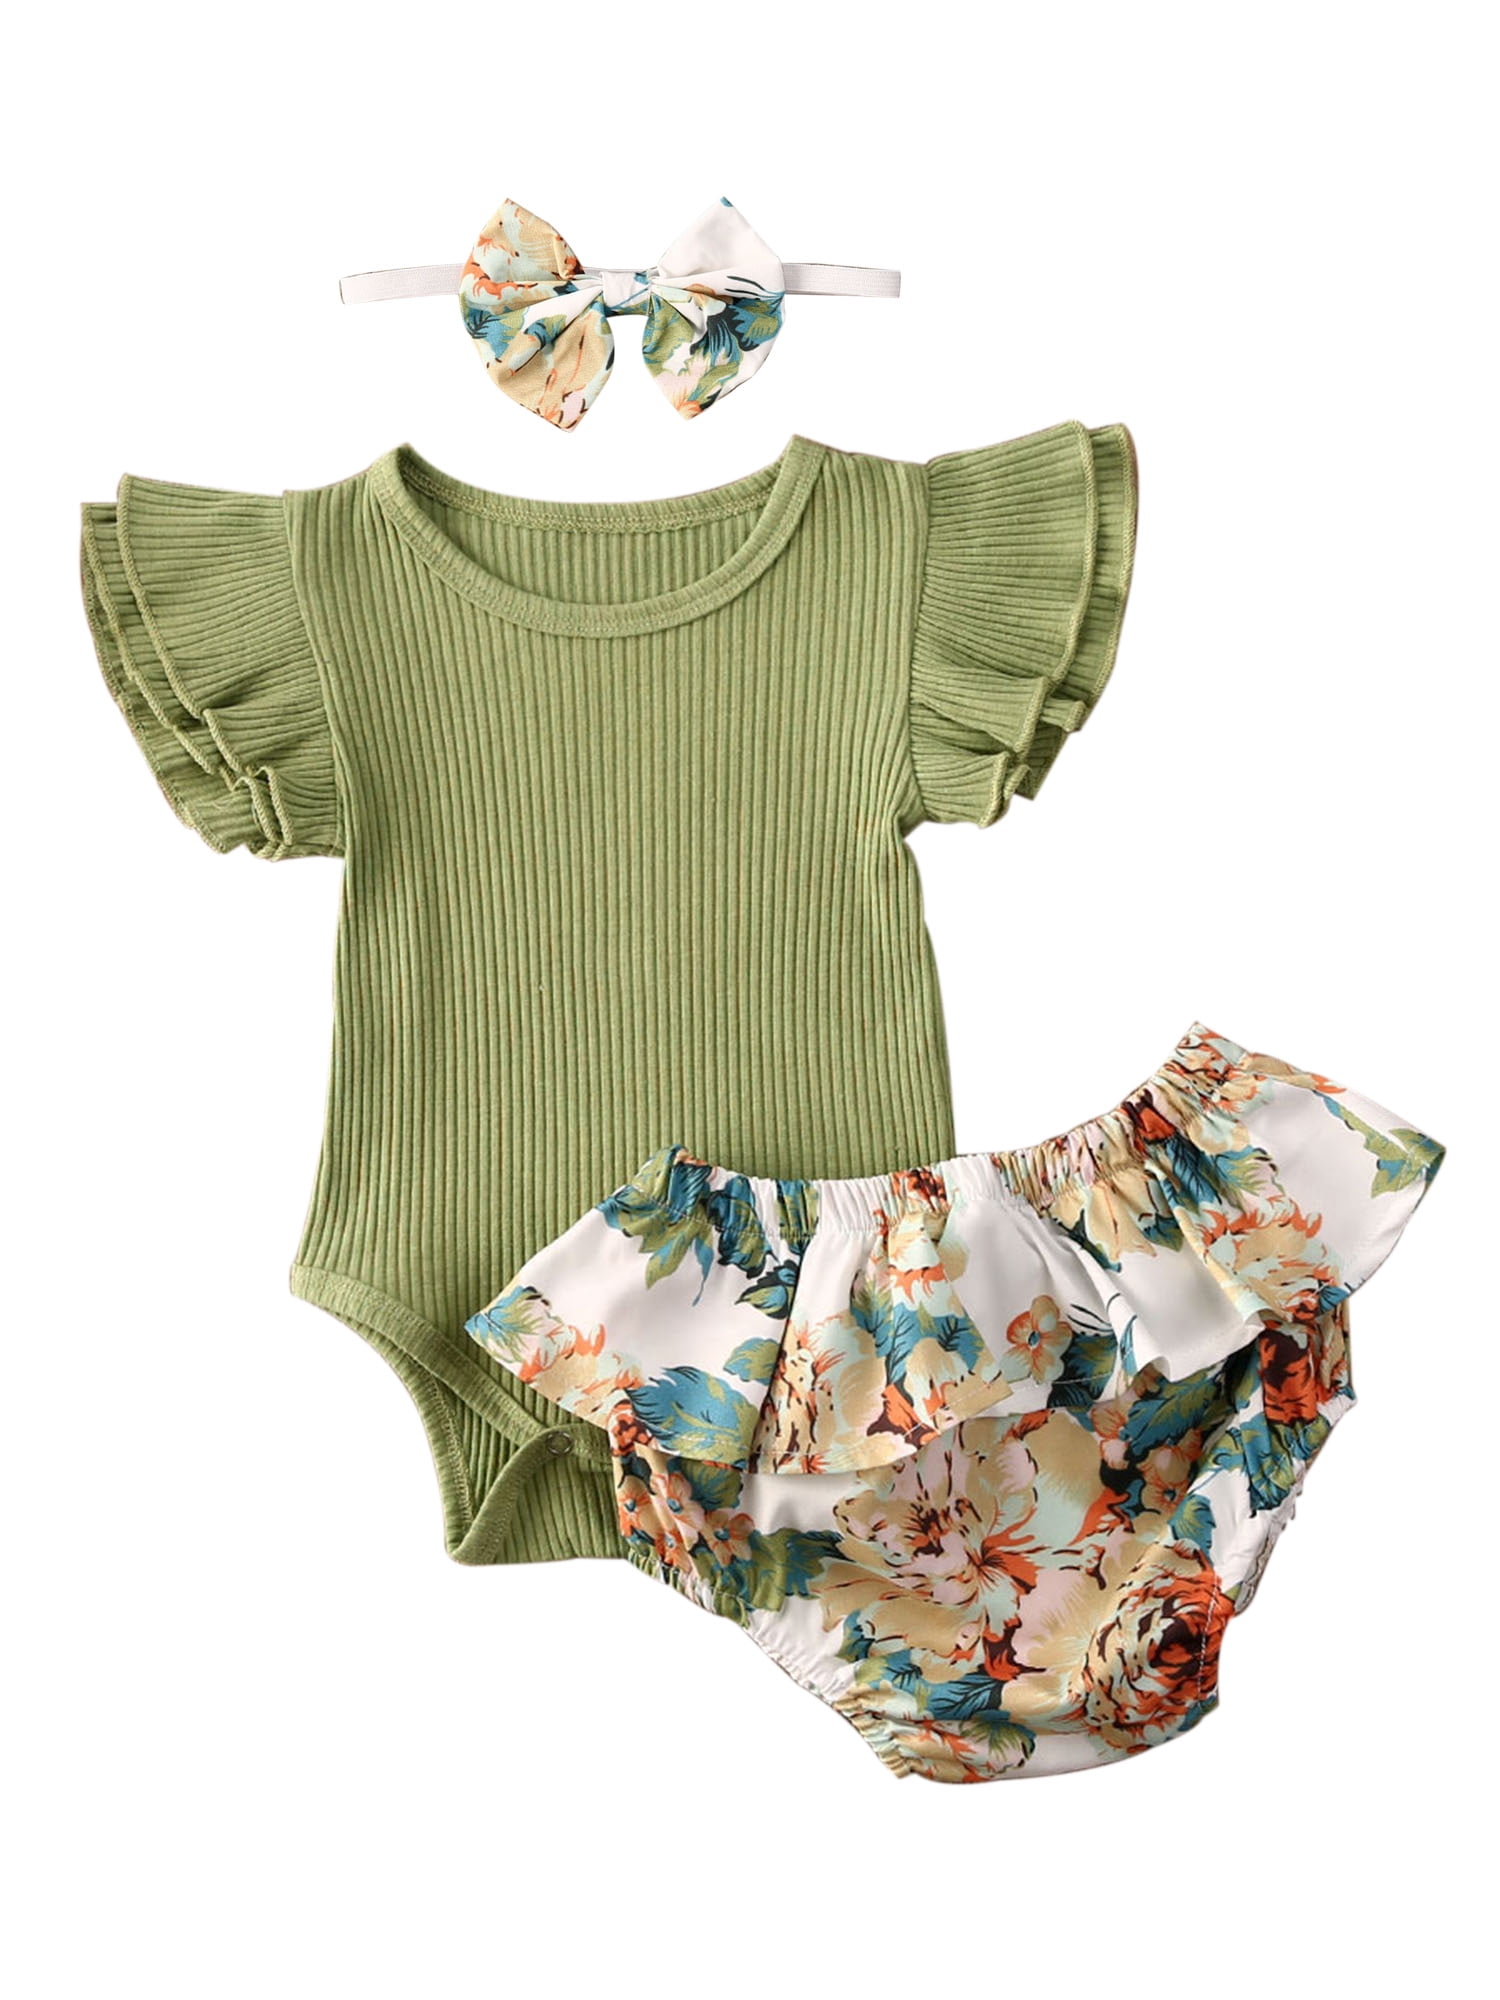 Newborn Baby Girls Clothes Floral Sleeve Romper Floral Short Pant 2pcs Summer Outfit